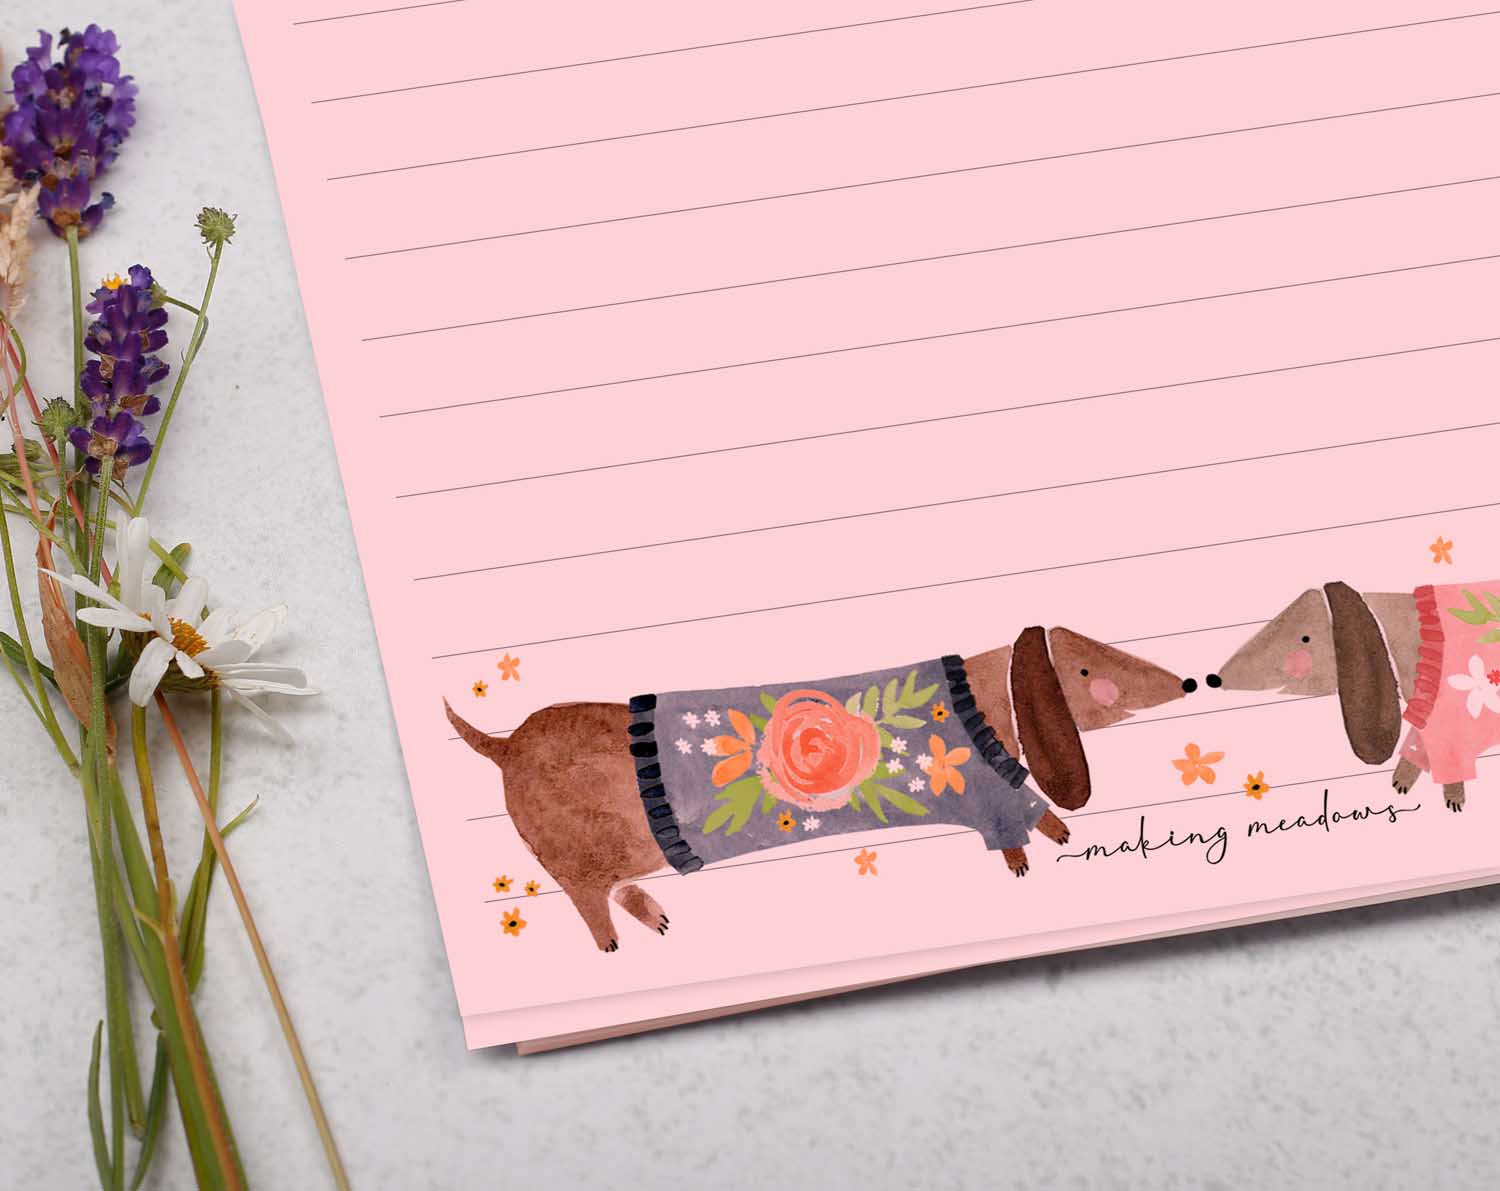 Pink A5 letter writing paper sheets with sausage dogs.